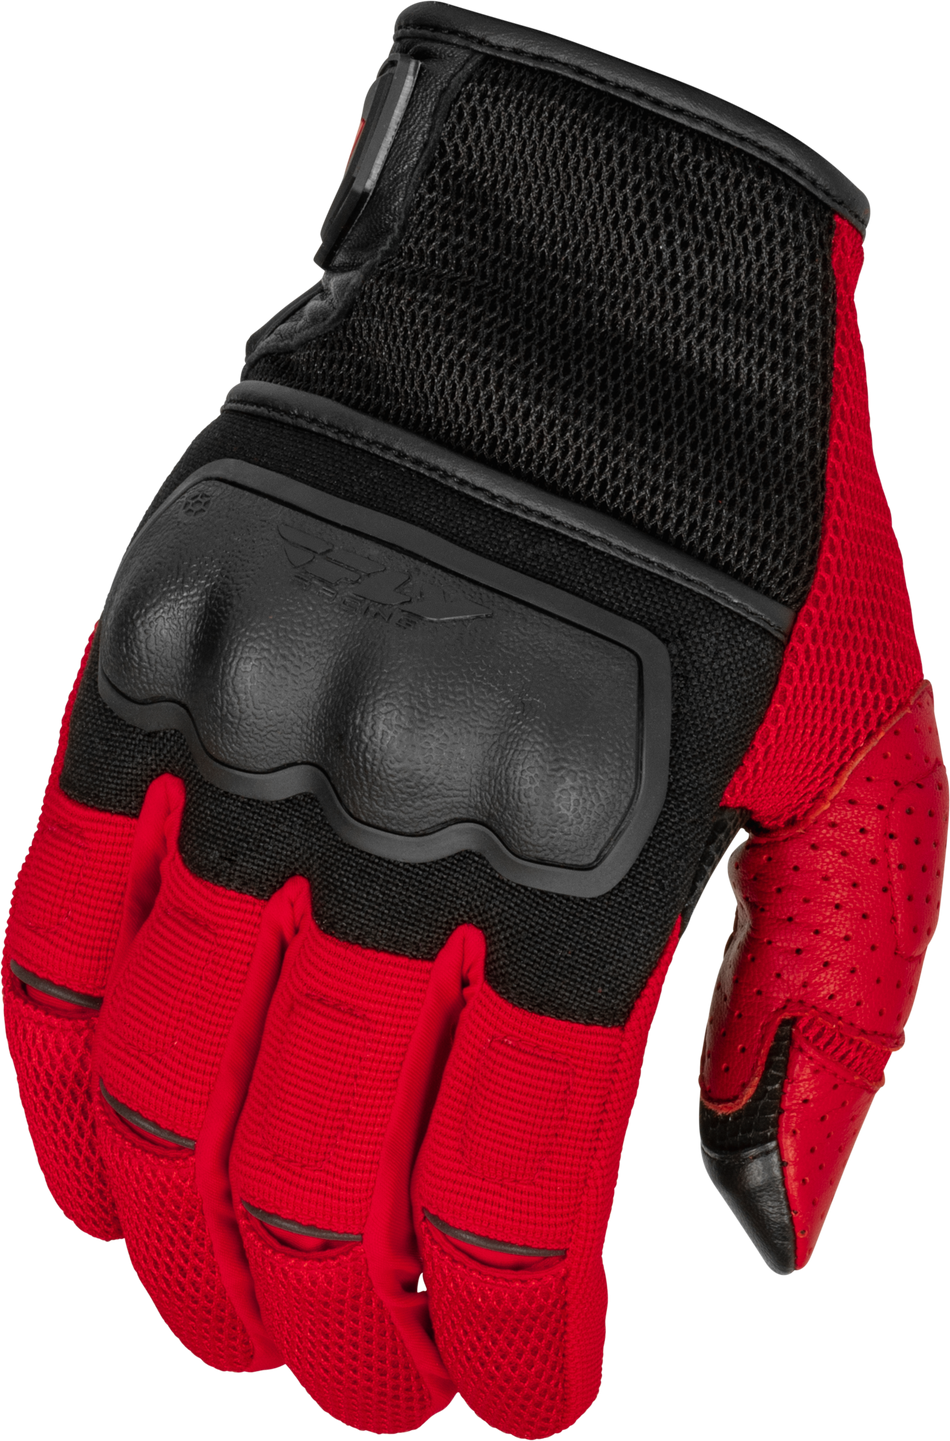 FLY RACING Coolpro Force Gloves Black/Red 2x 476-41292X